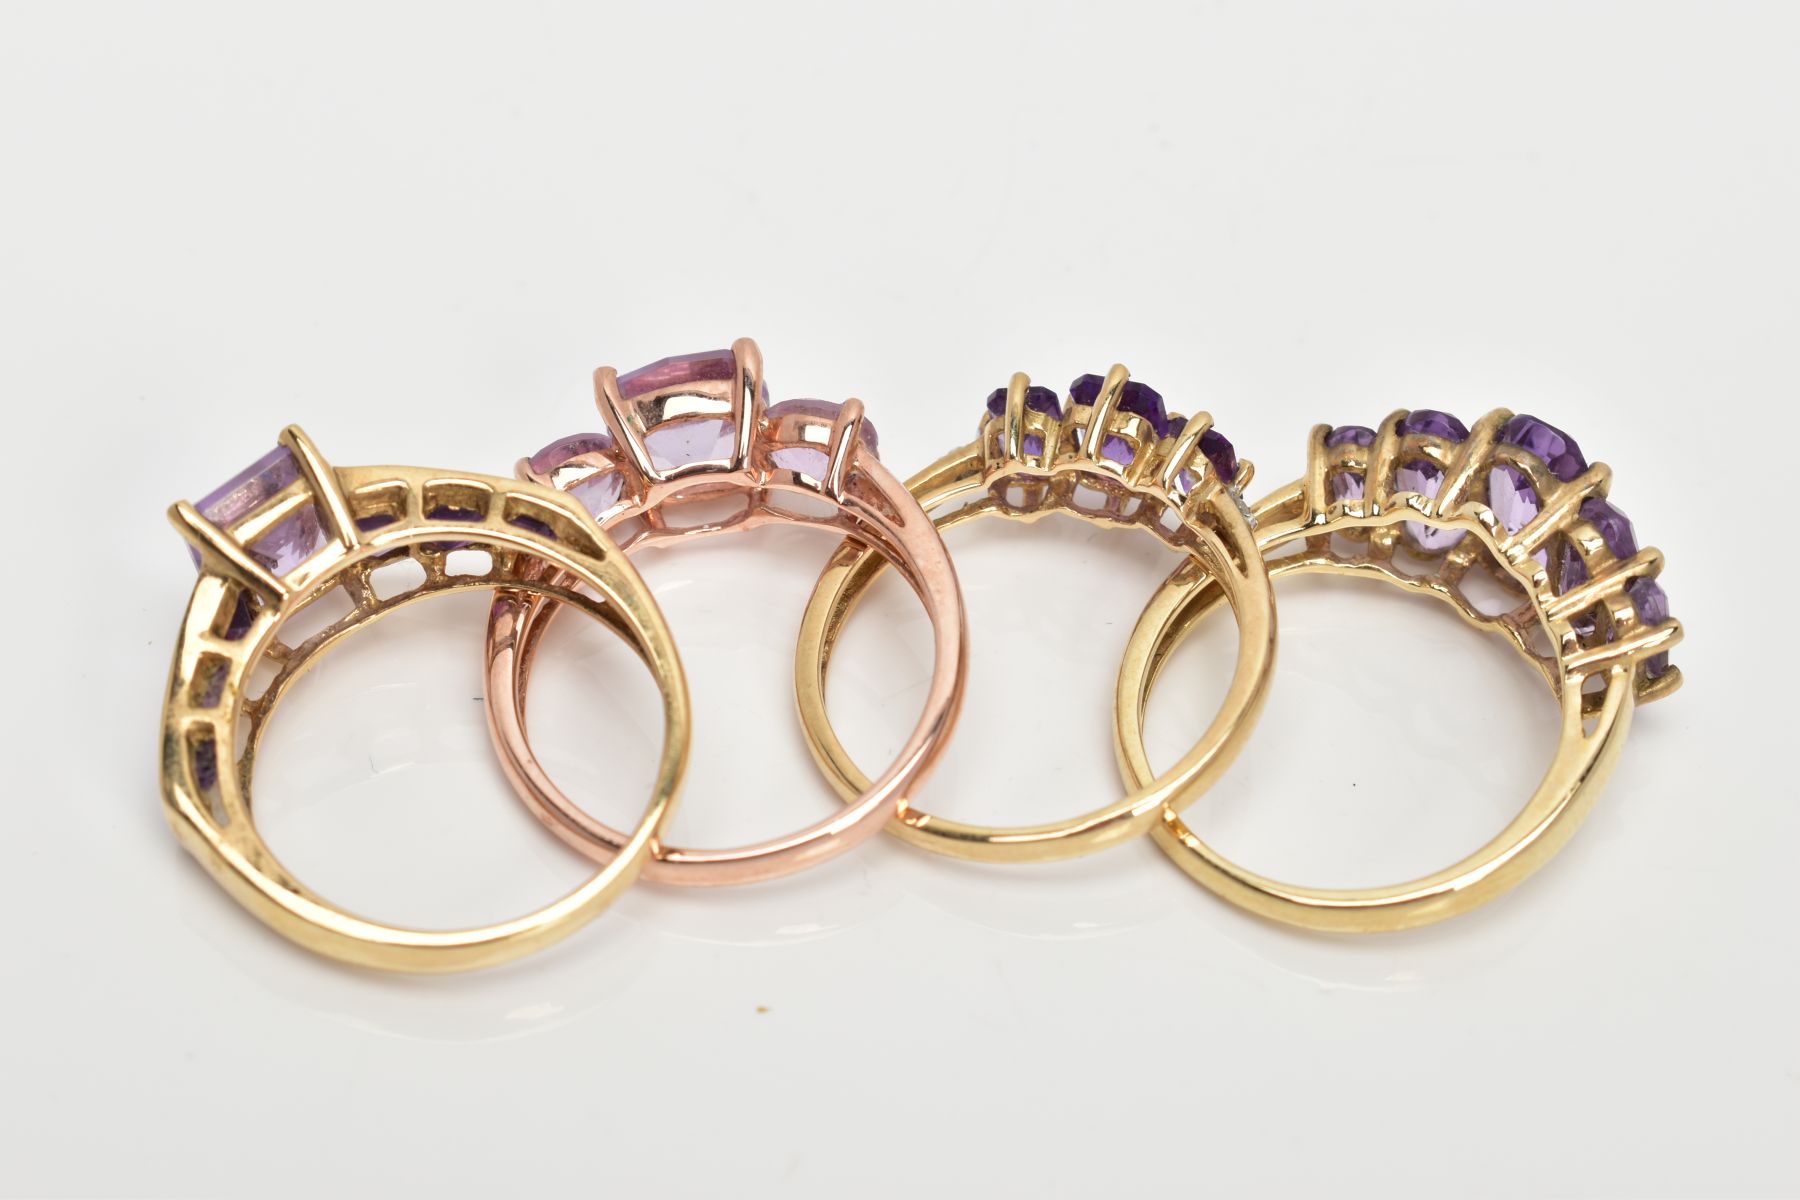 FOUR 9CT GOLD AMETHYST DRESS RINGS, three yellow gold and one rose gold, each set with vary cut - Image 3 of 3